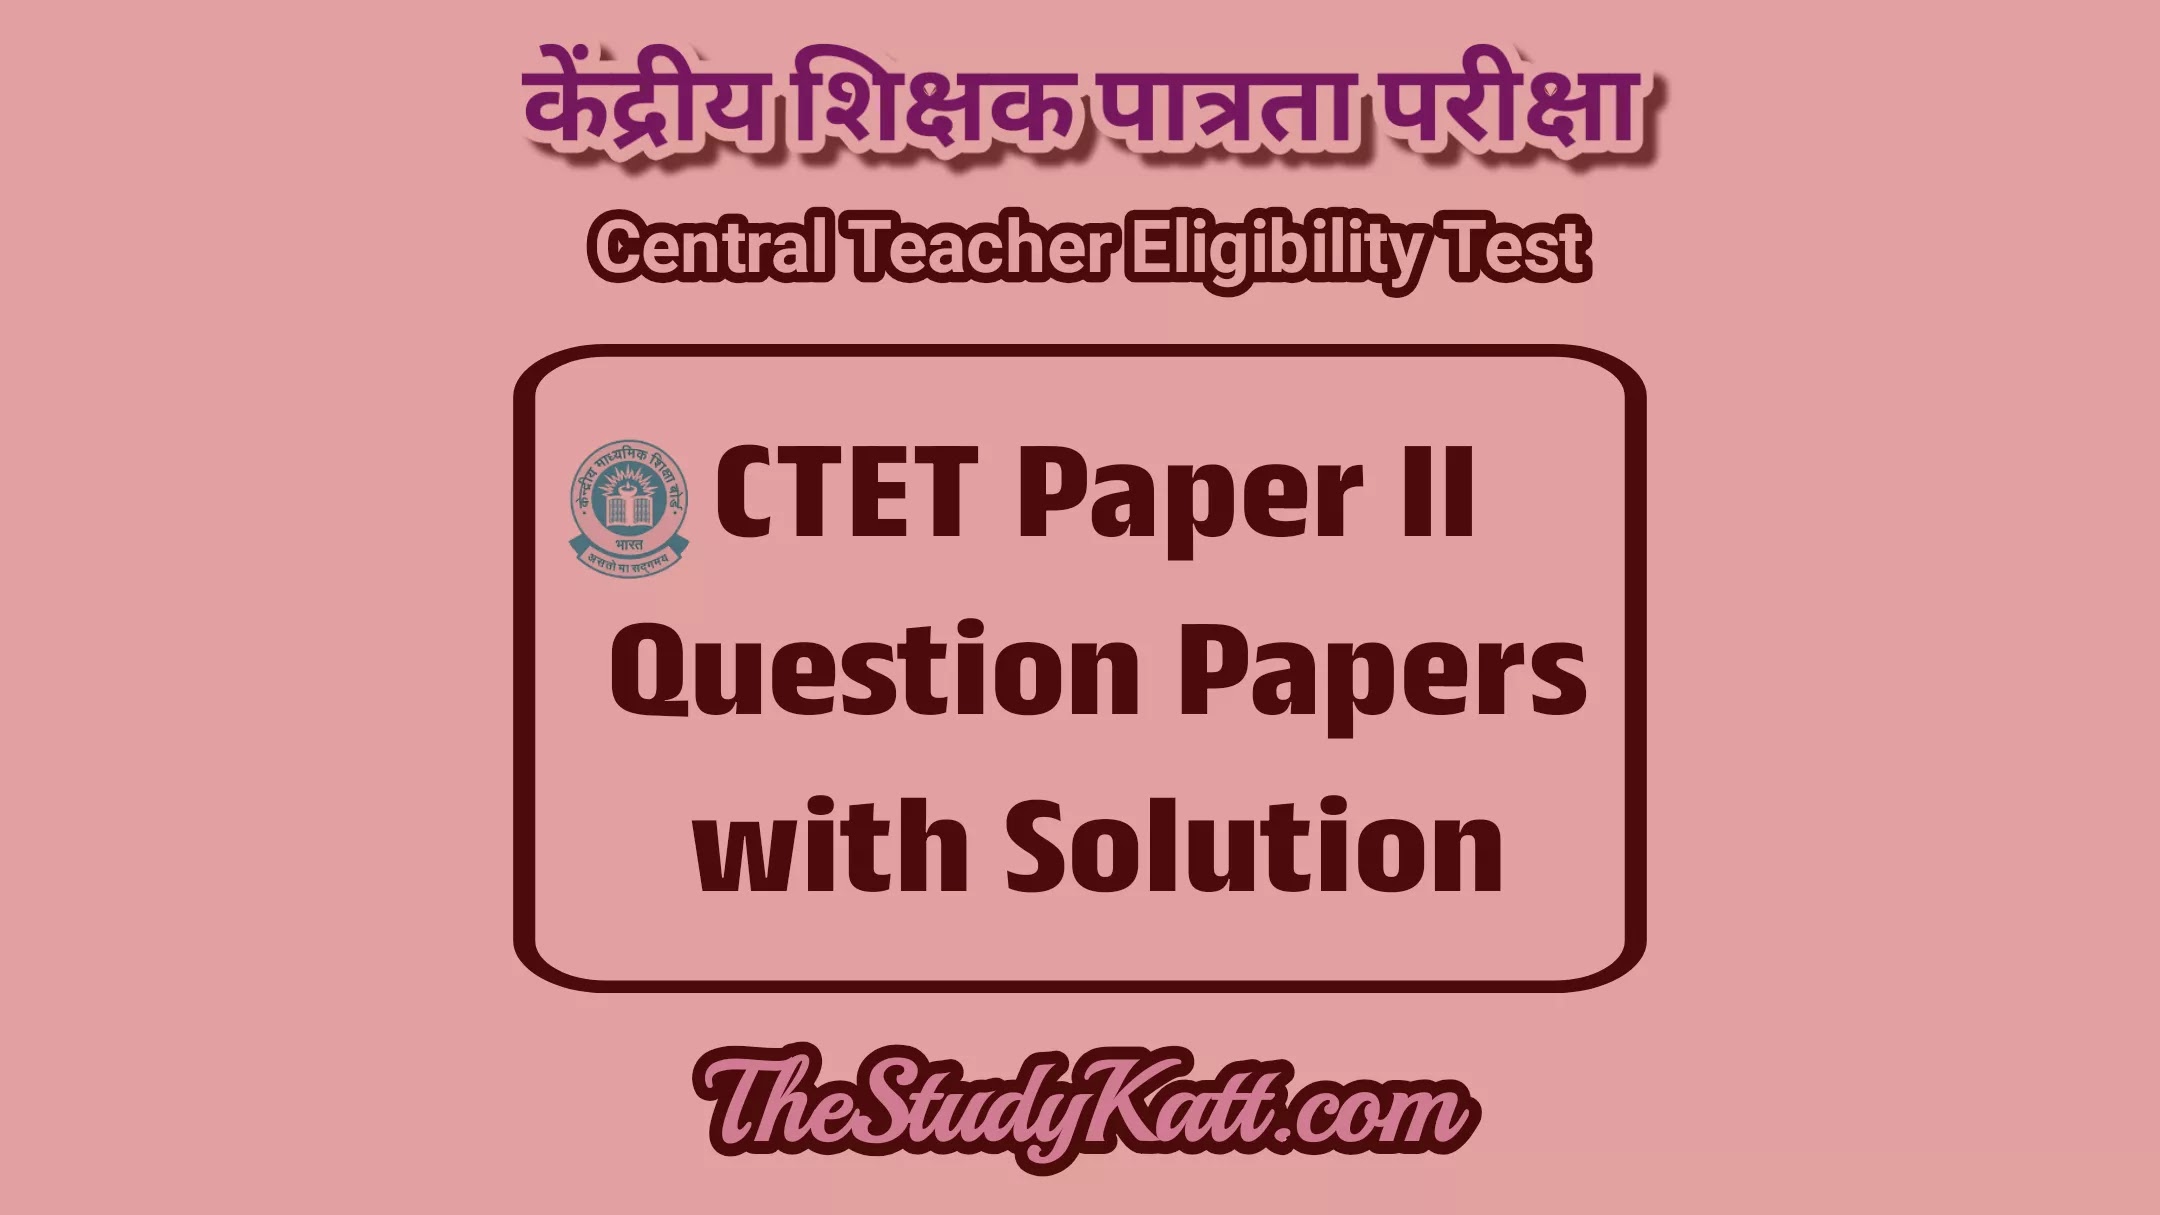 CTET July 2013 Question Papers with Solutions - Paper 2 | CTET जुलै २०१३ प्रश्नपत्रिका स्पष्टीकरनासह - पेपर २